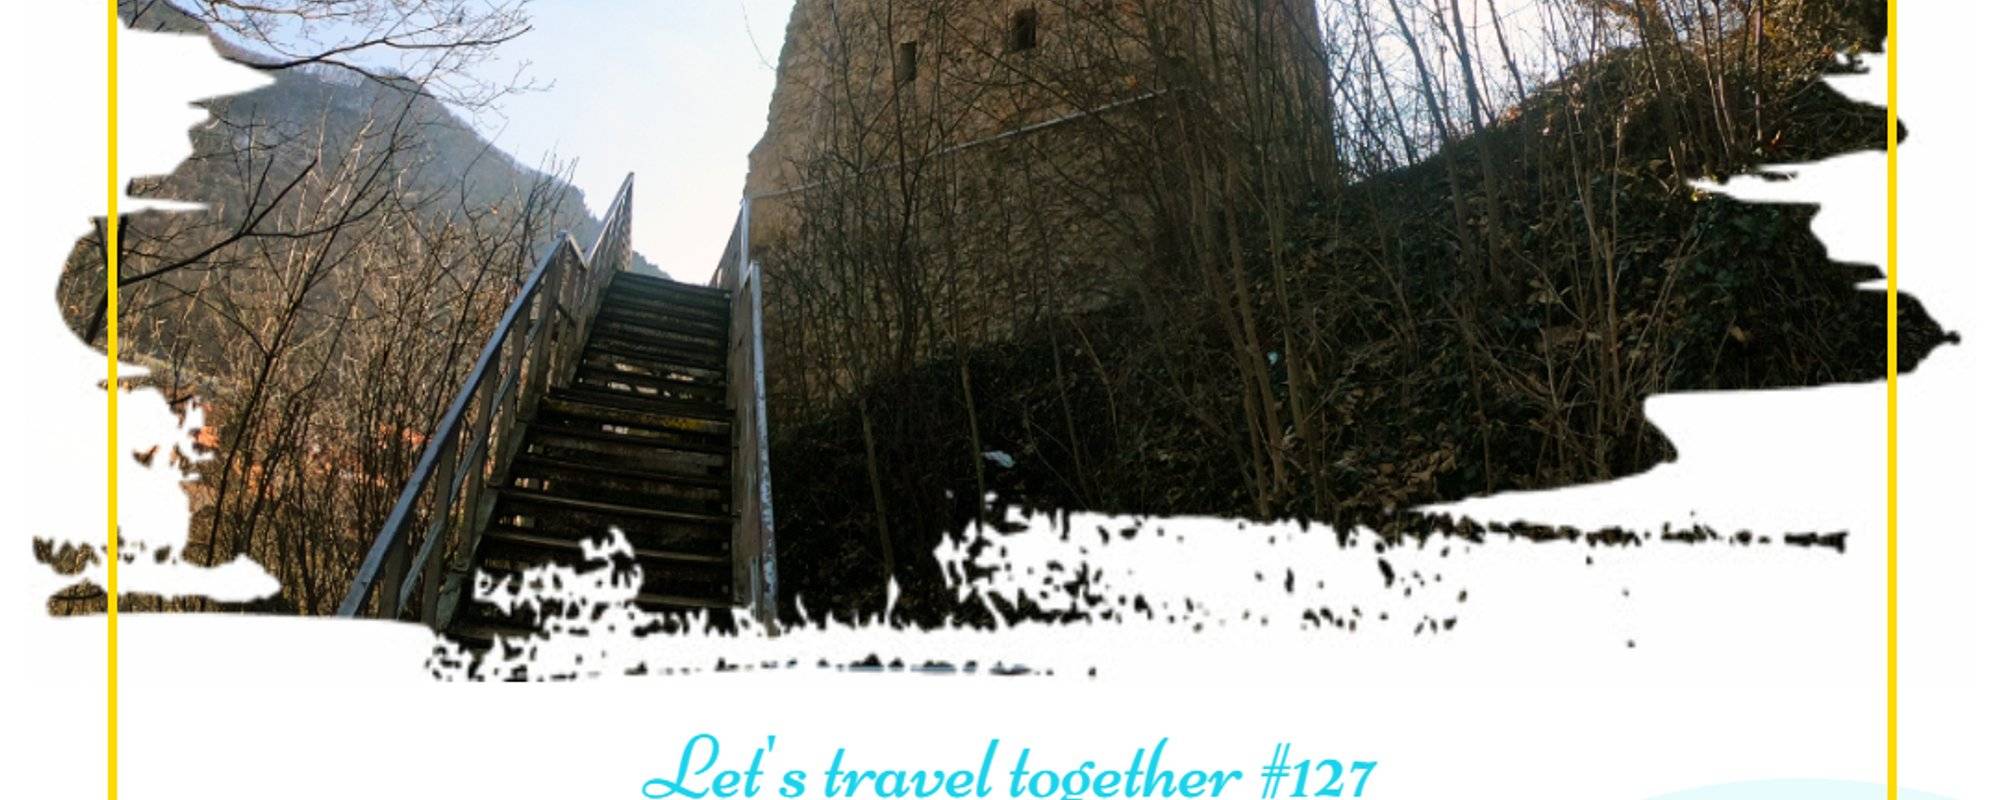 Let's travel together #127 - Turnul Alb & Turnul Negru (The White Tower & The Black Tower)